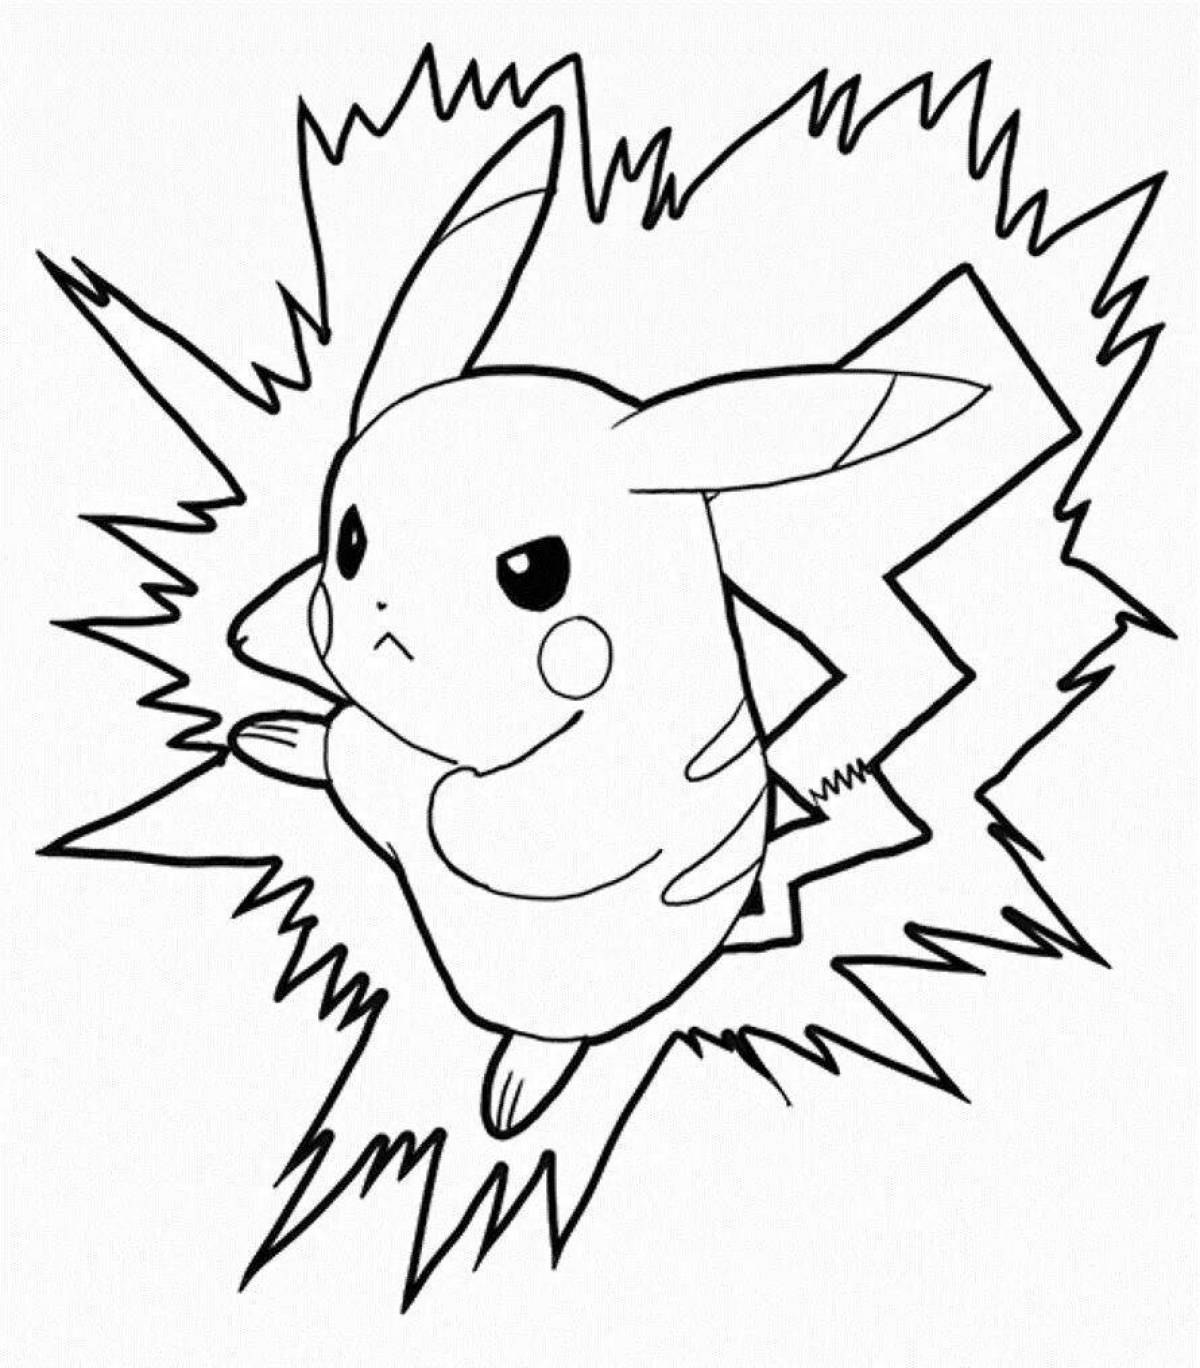 A lovely pikachu coloring book for boys